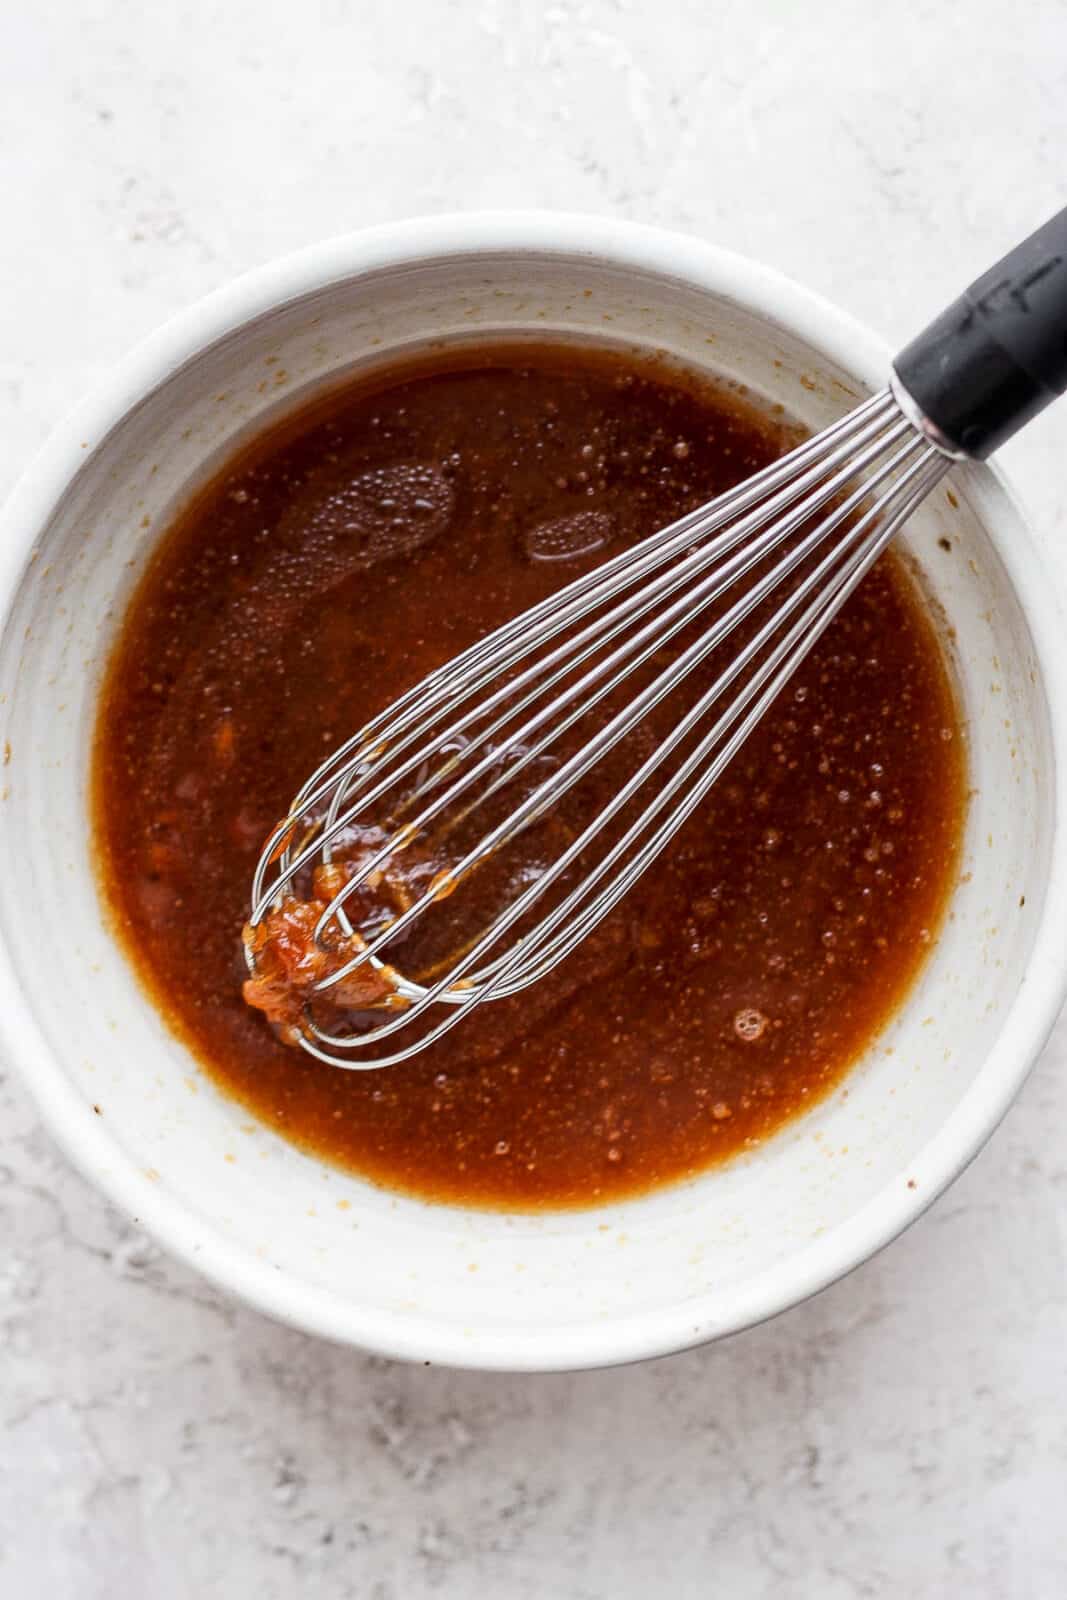 Marinade in a bowl after whisking.